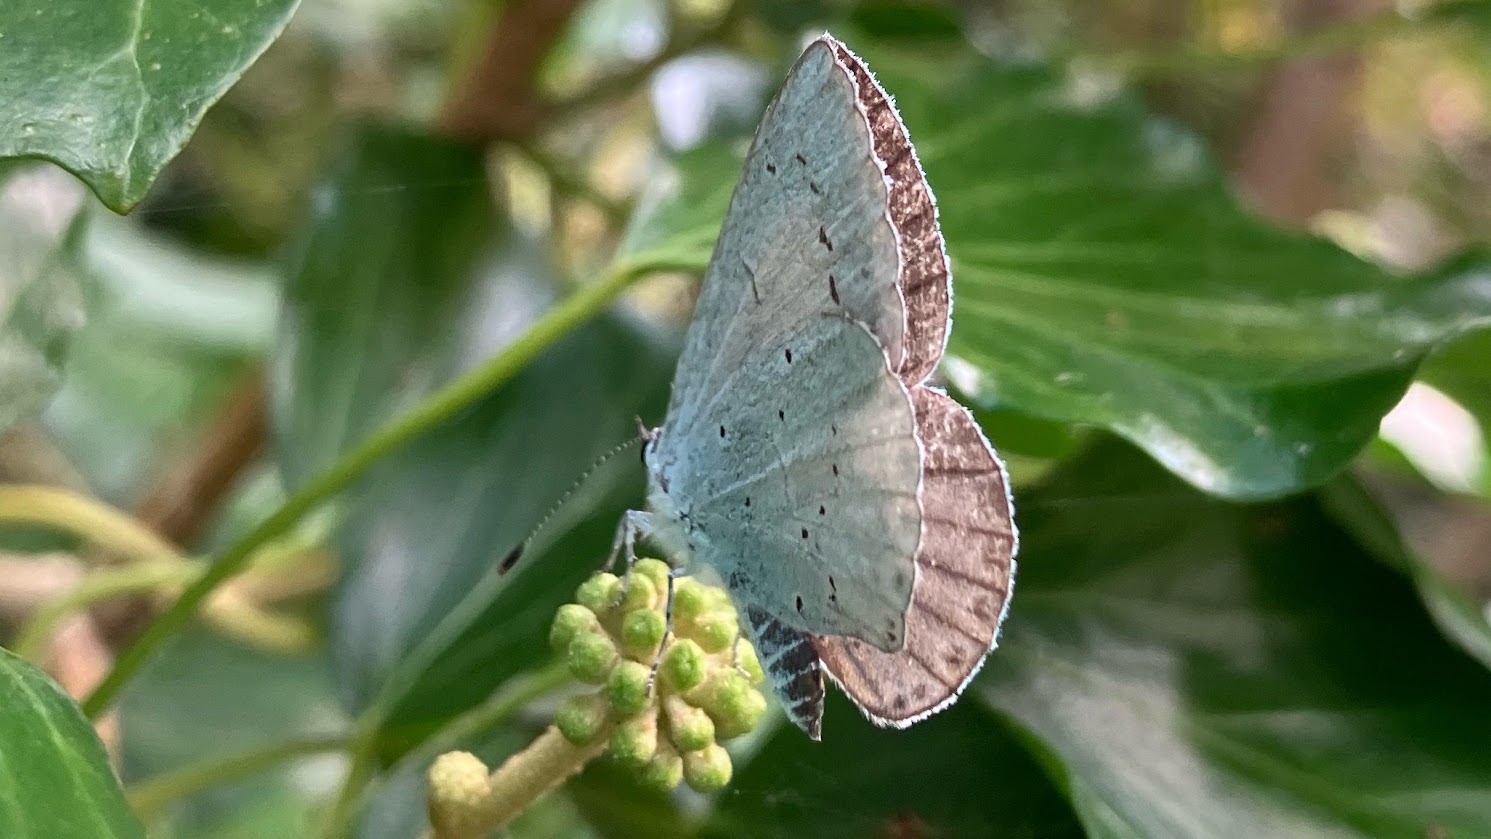 A Holly blue butterfly at rest on young green ivy berries, against a background of ivy leaves.